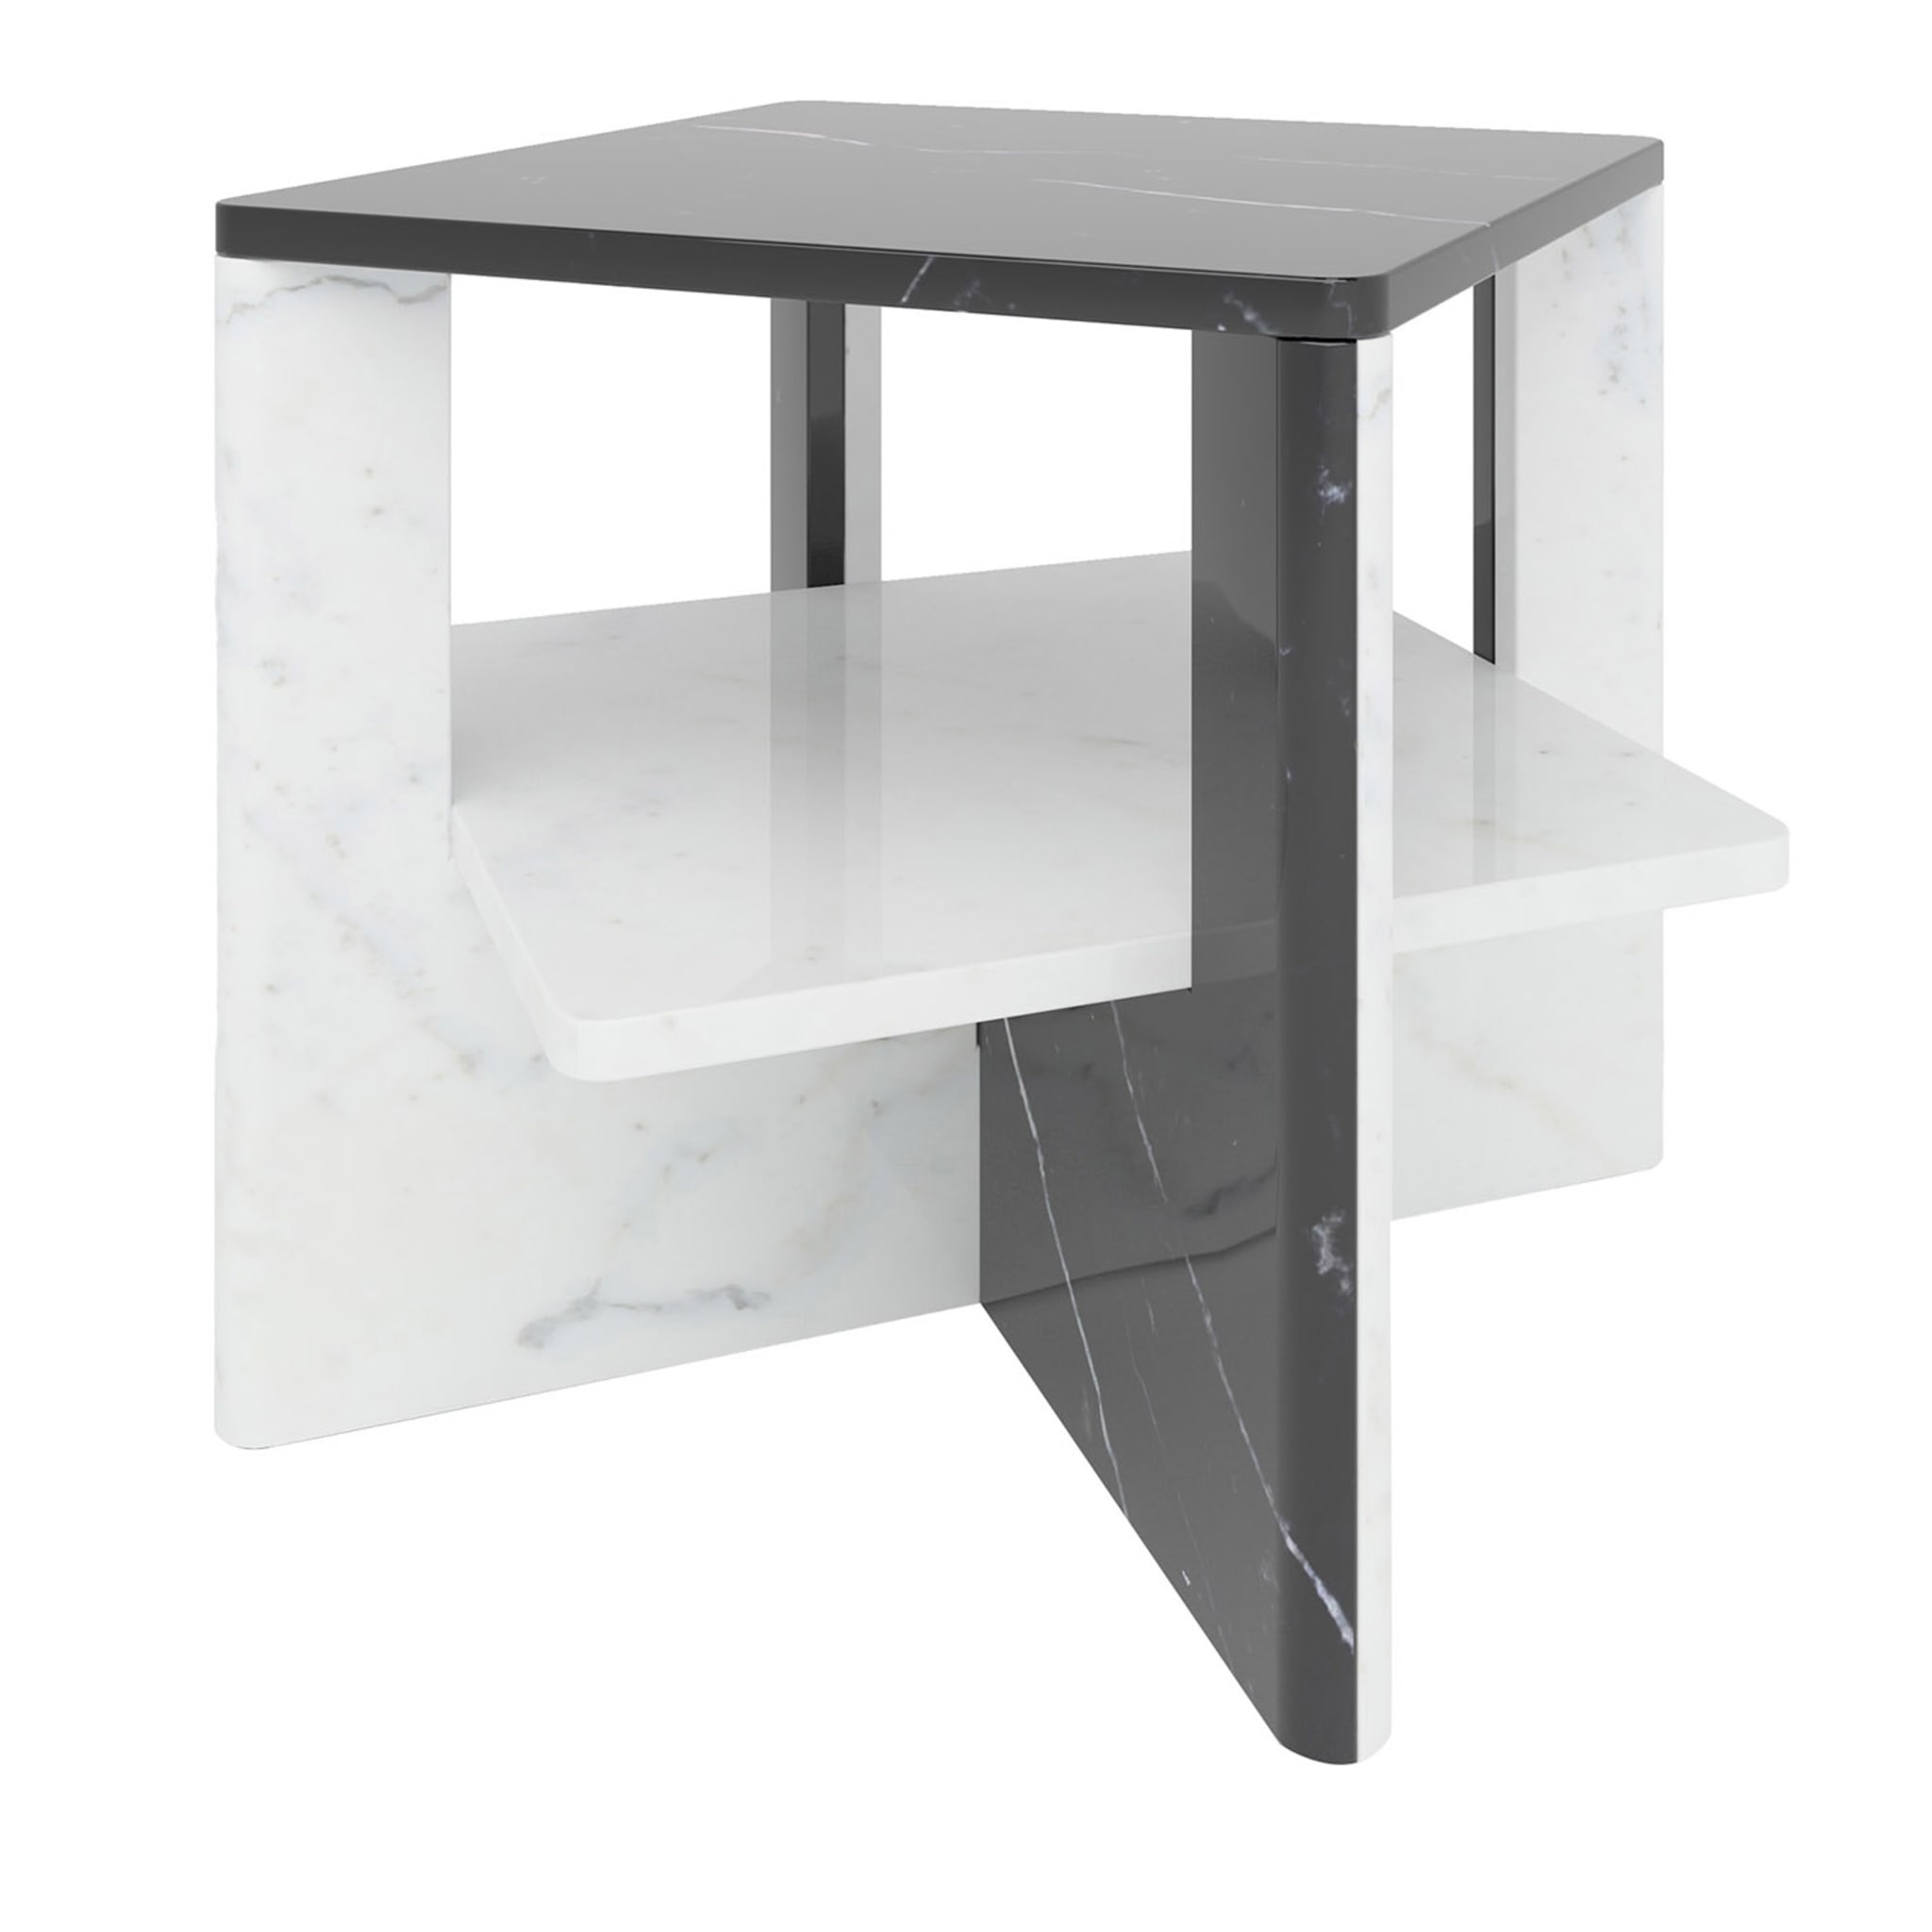 Plus+Double Marble Coffee Table #4 - Main view